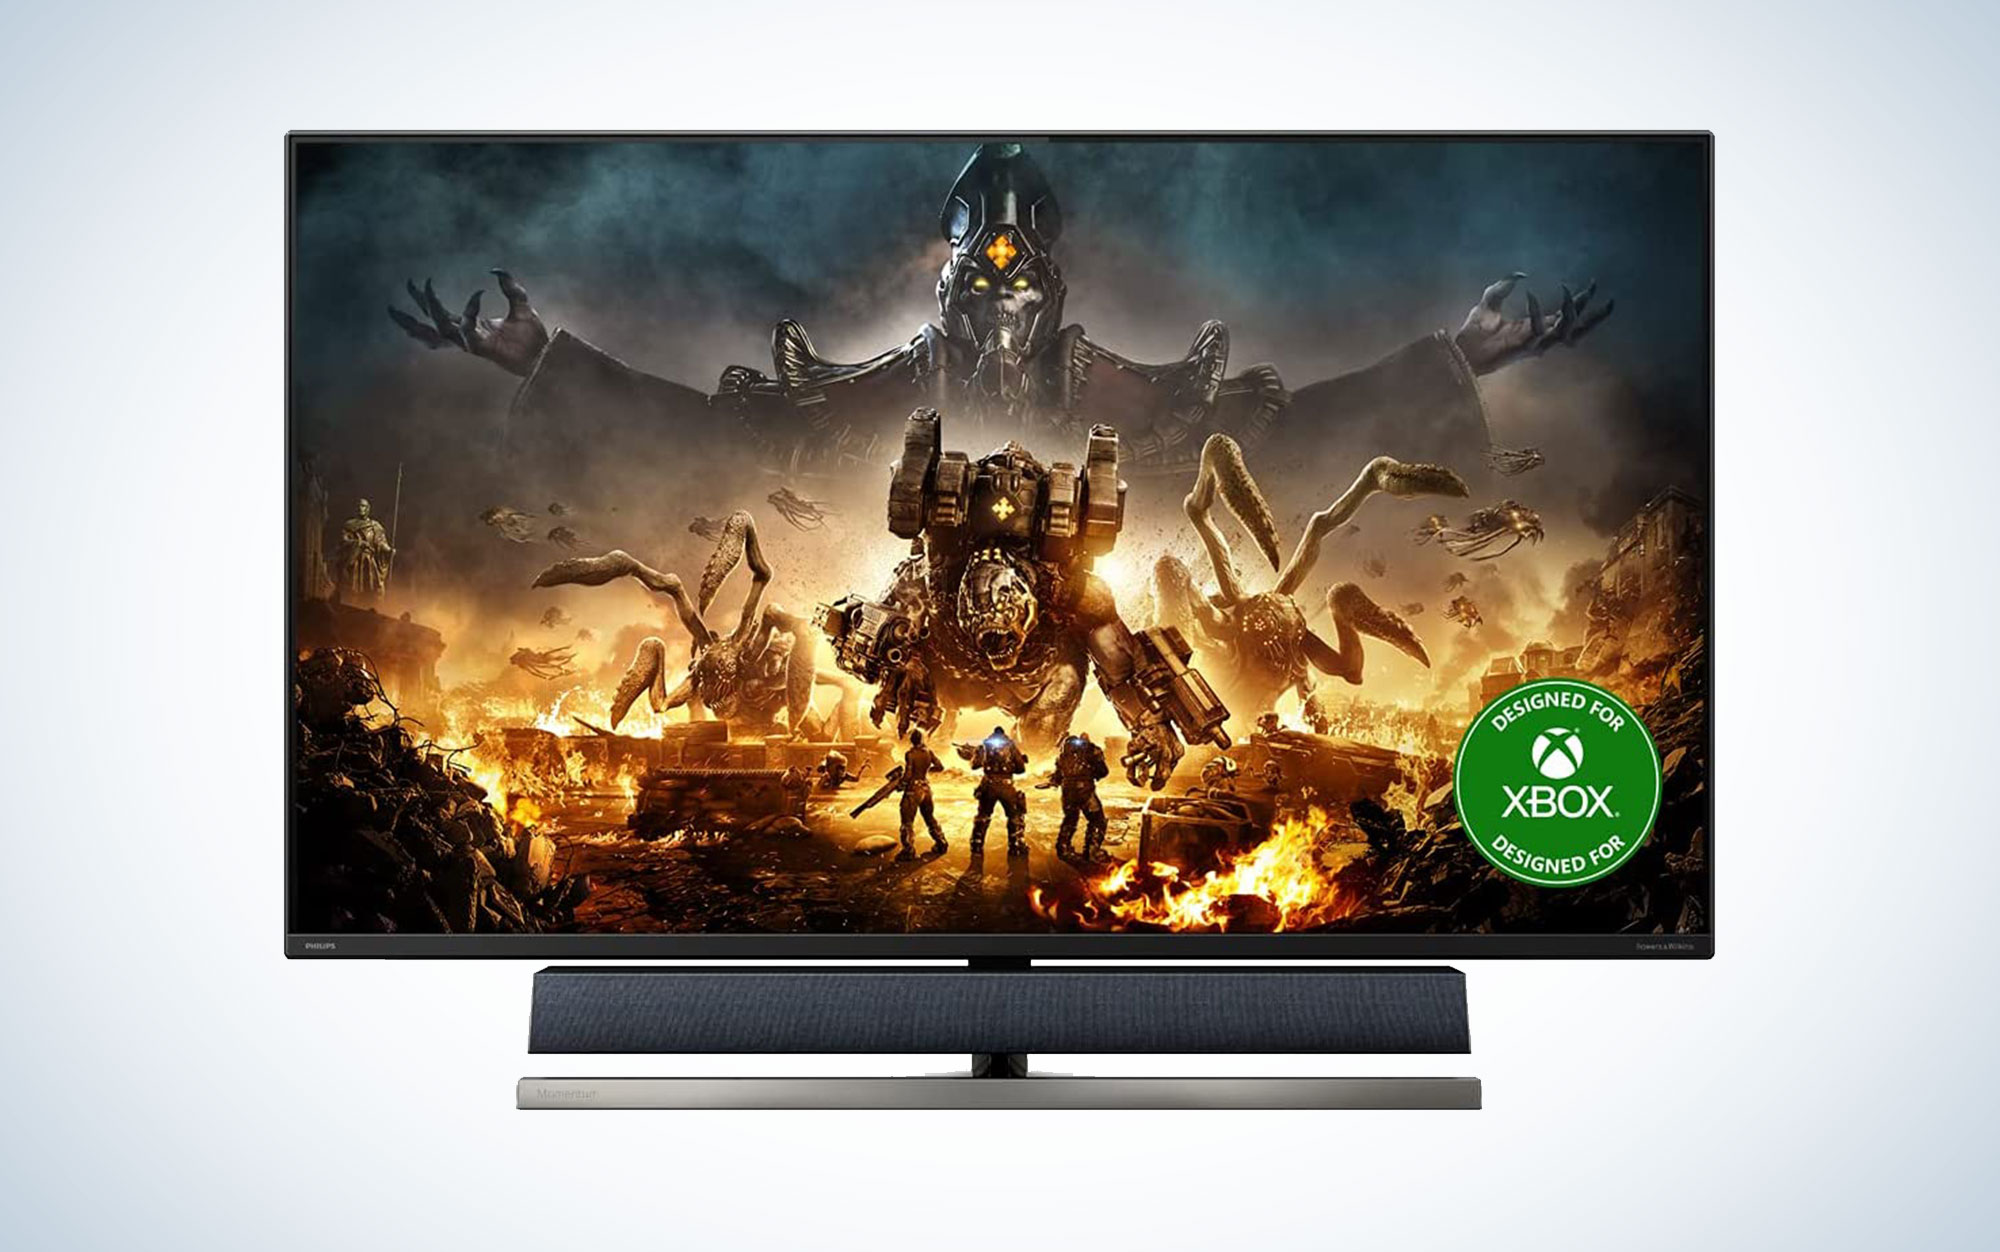 The best monitors for Xbox Series X/S to buy in 2023